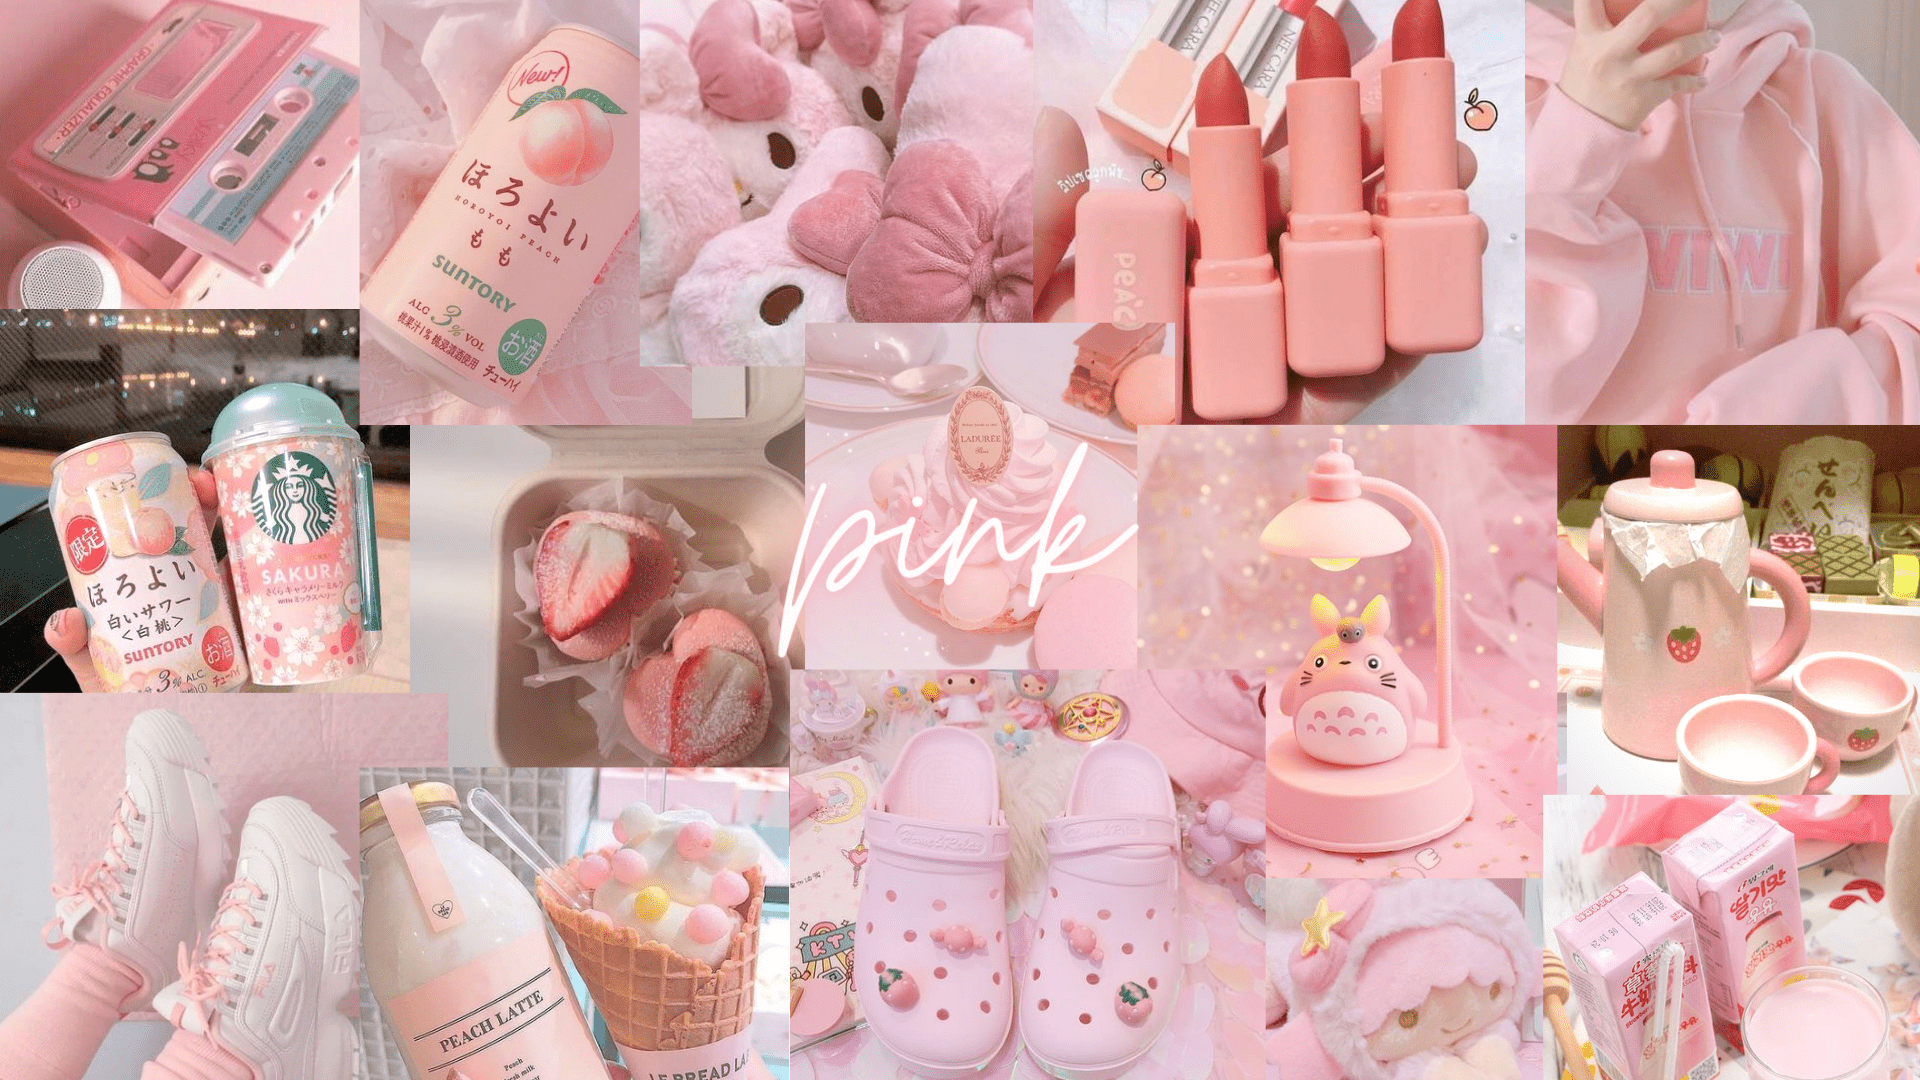 A collage of pink aesthetic images including ice cream, shoes, and makeup. - Soft pink